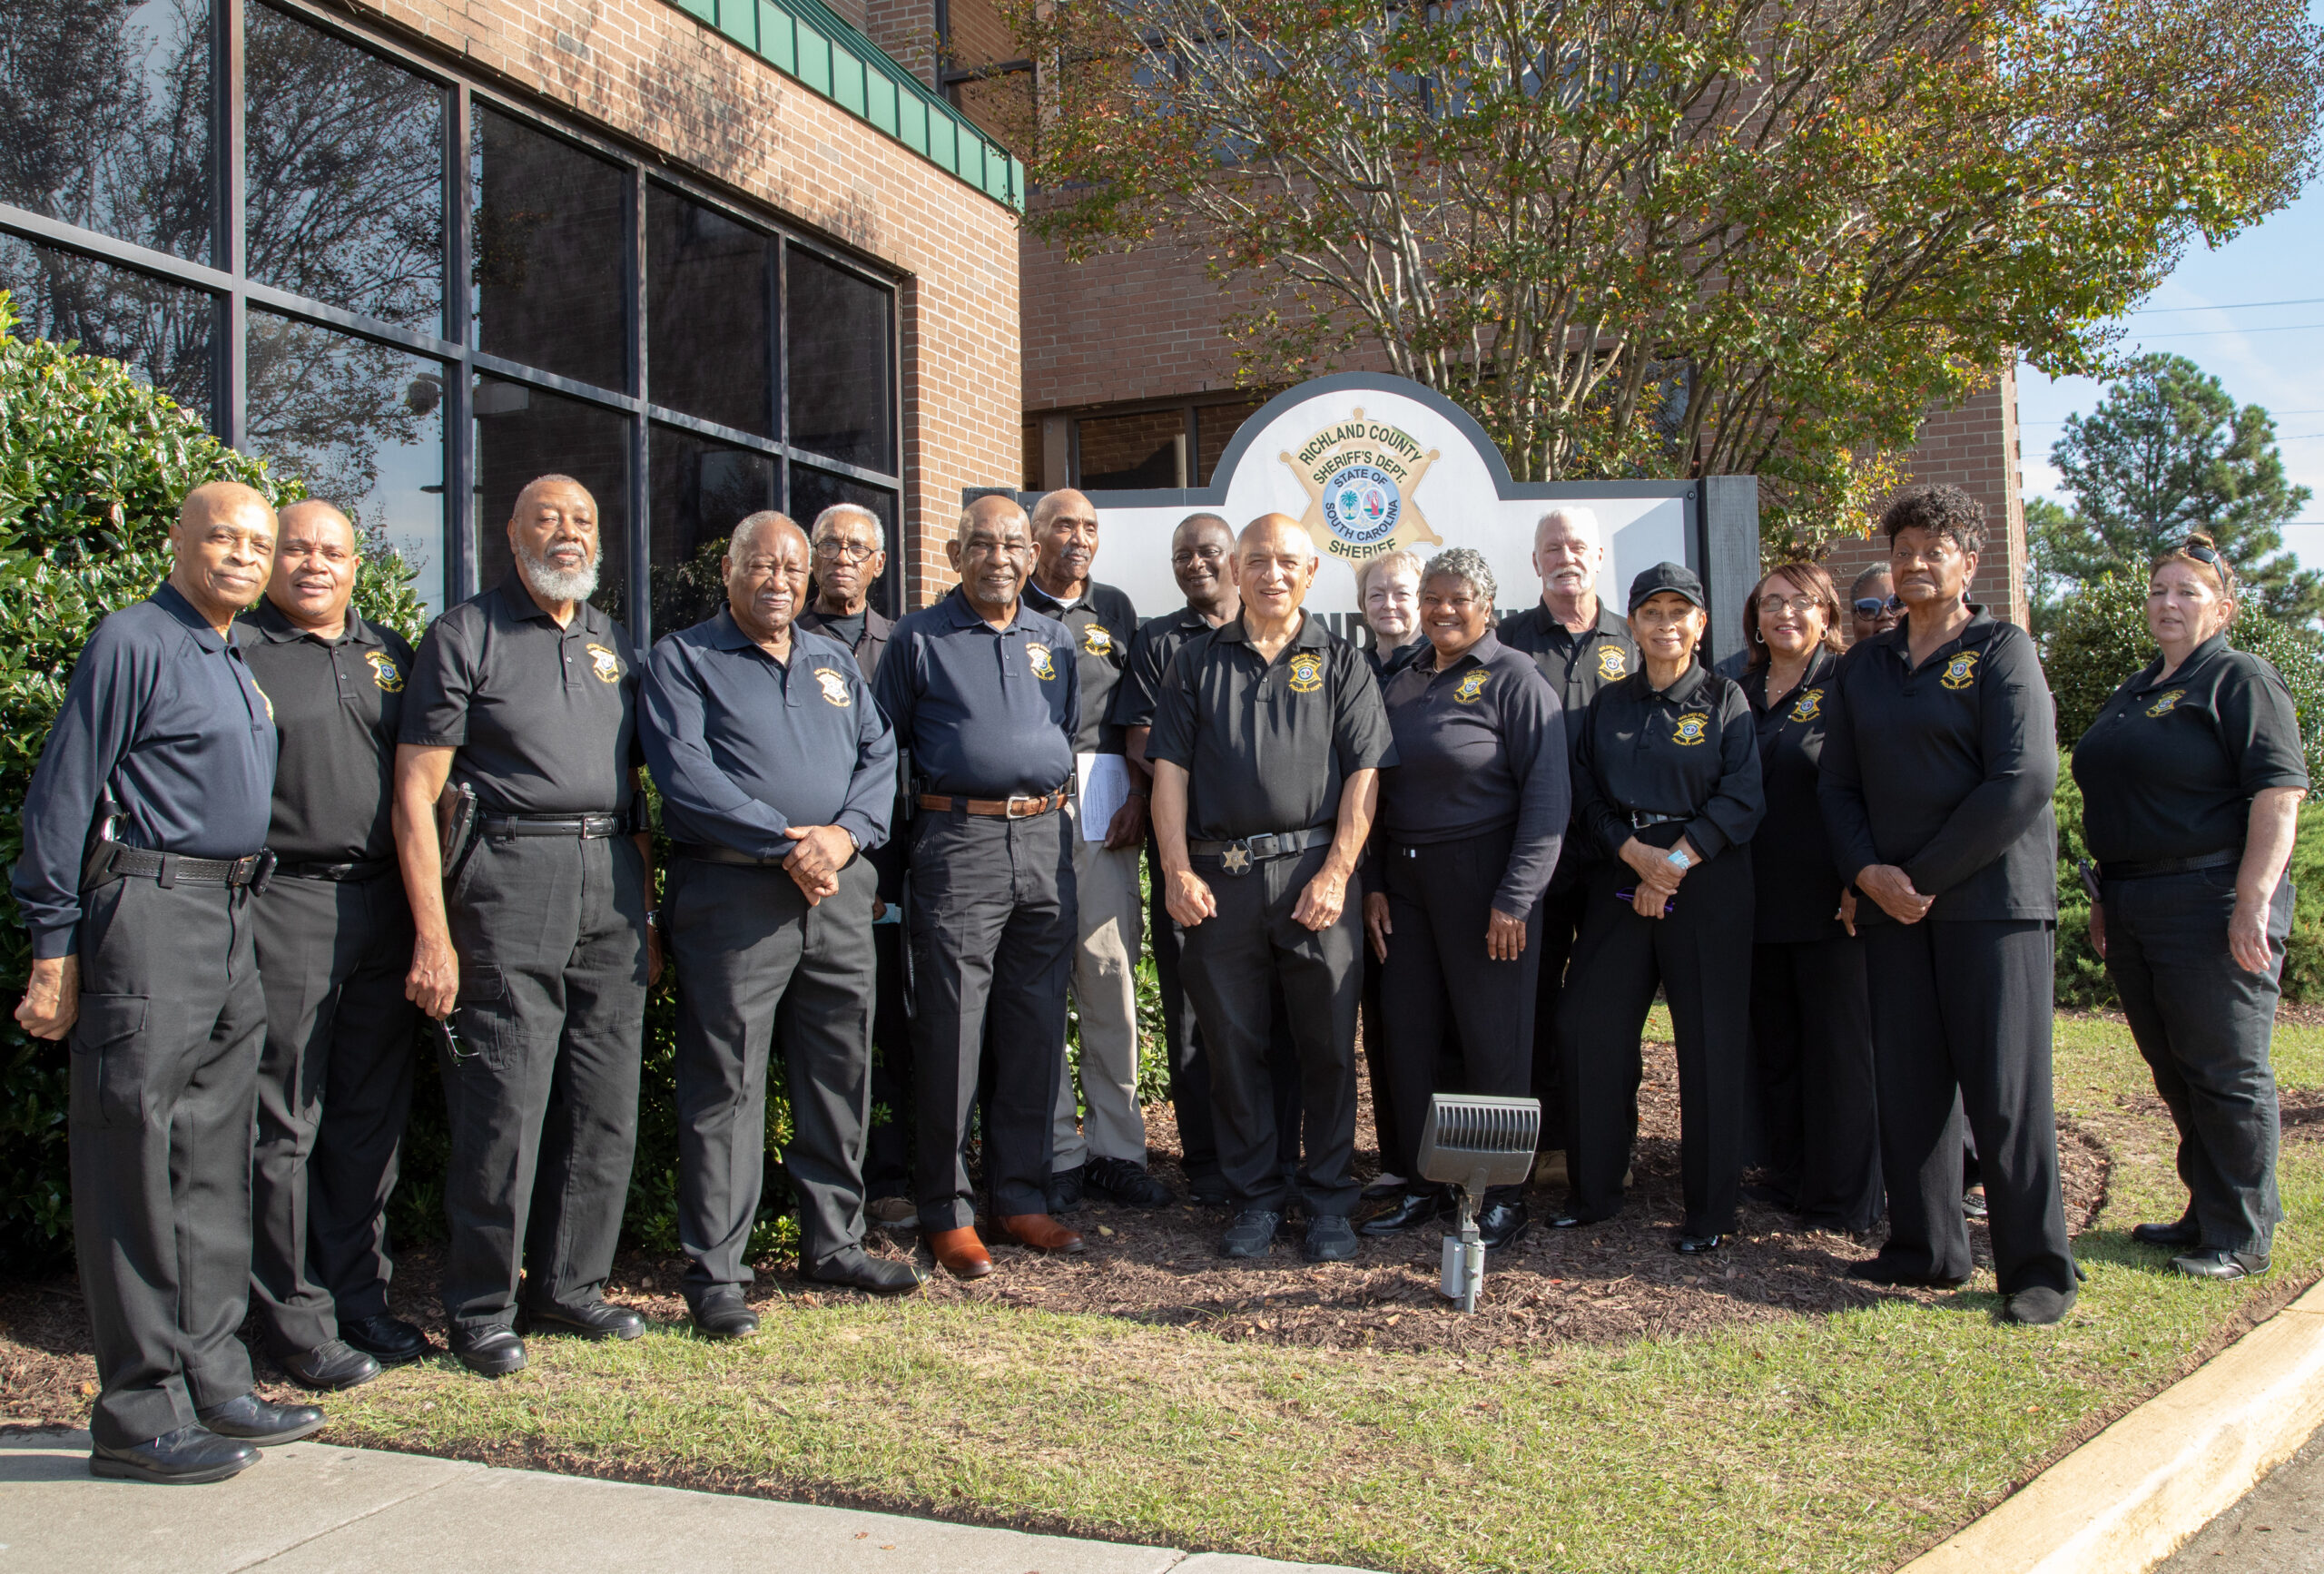 Project Hope – Richland County Sheriffs Department image